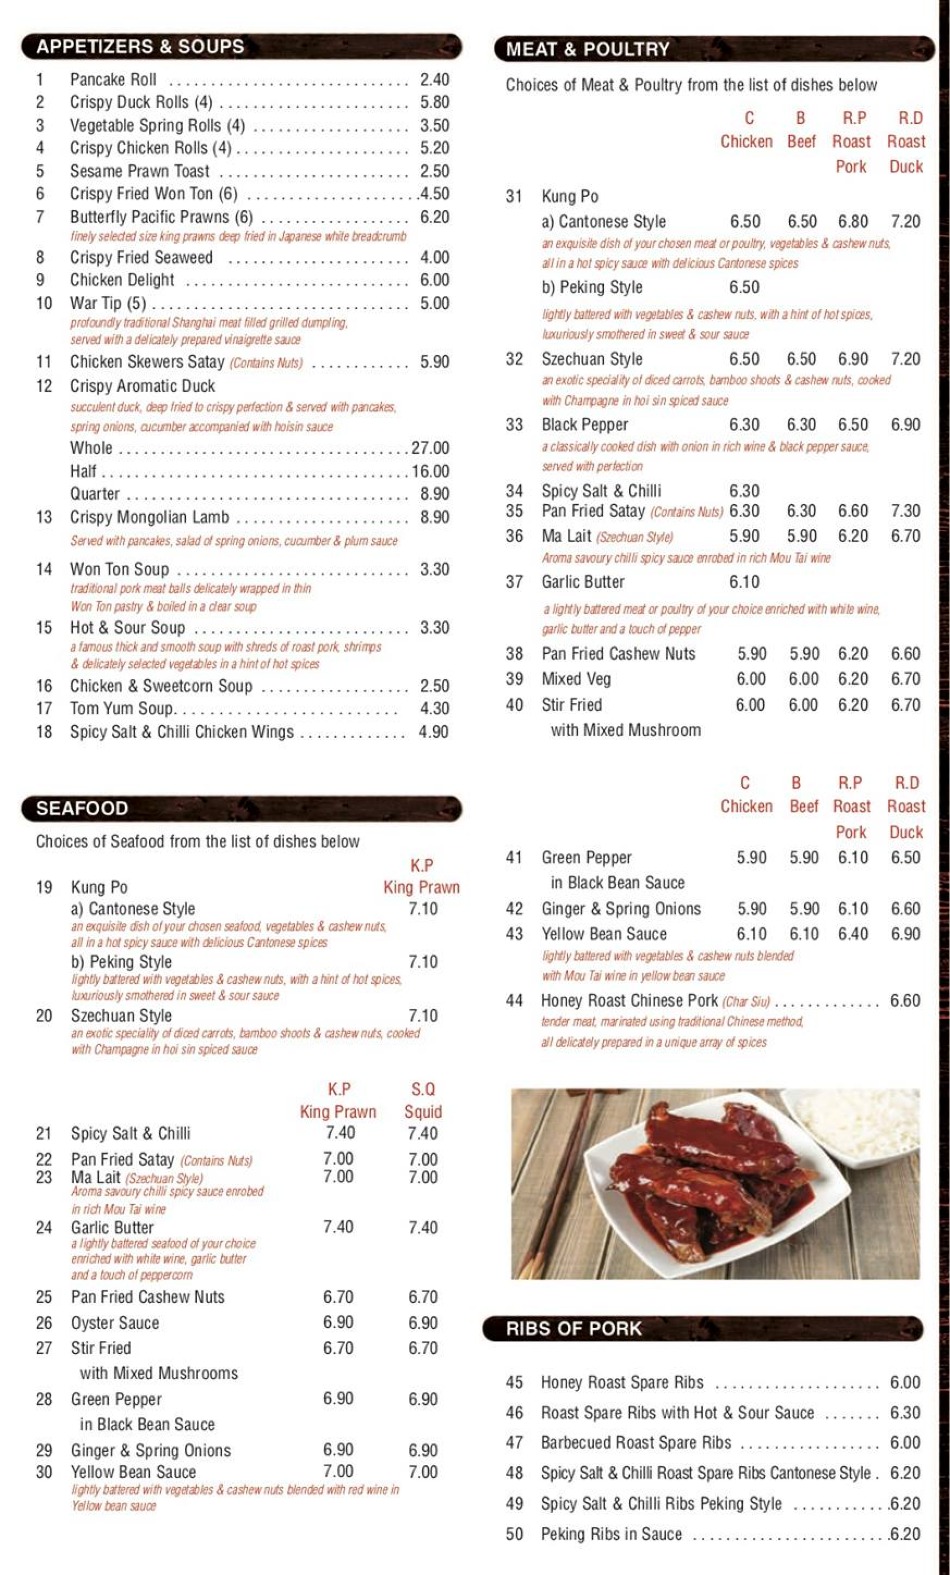 Takeaway Restaurant Menu Page - Pando Thai, Chinese and Pan Asian cuisine - Great Yarmouth